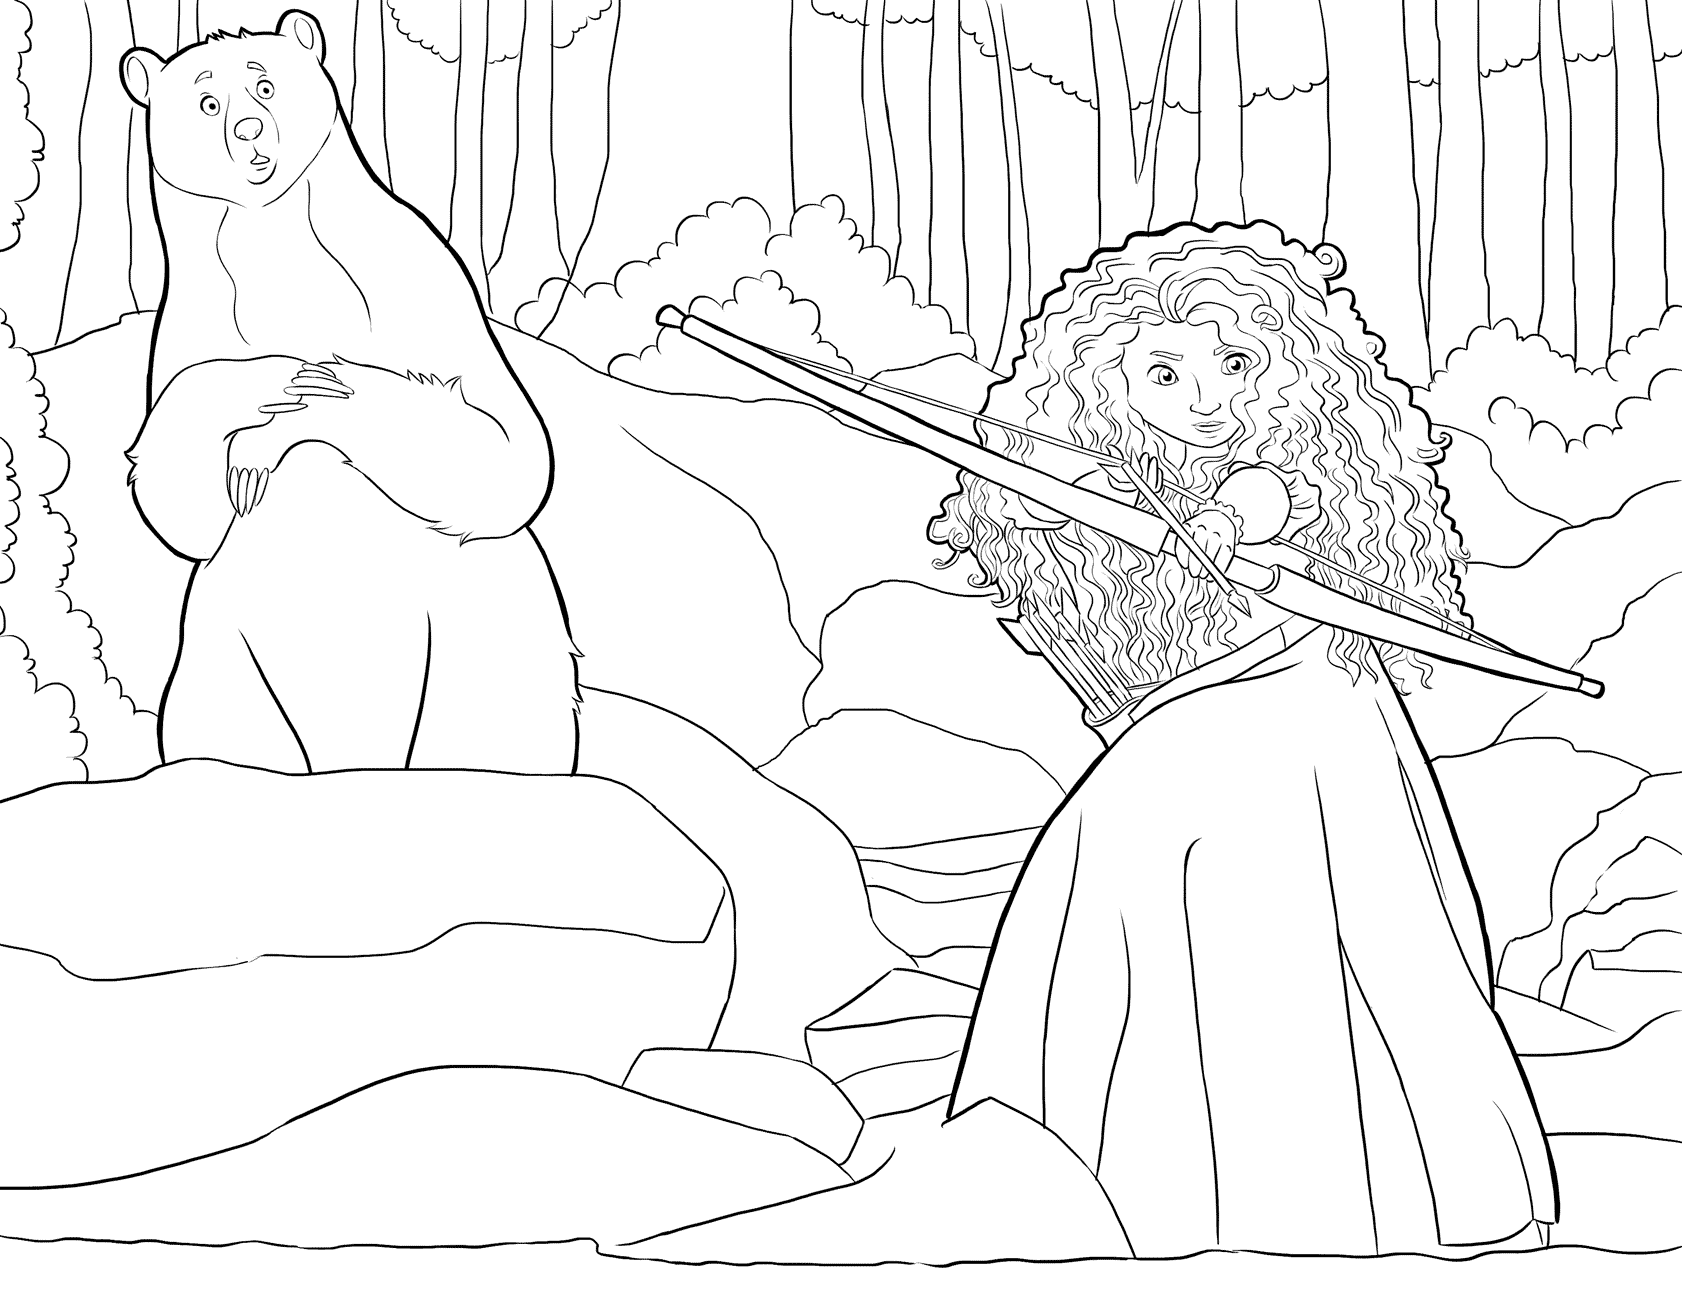 Coloring page - Merida with a bow in her hands